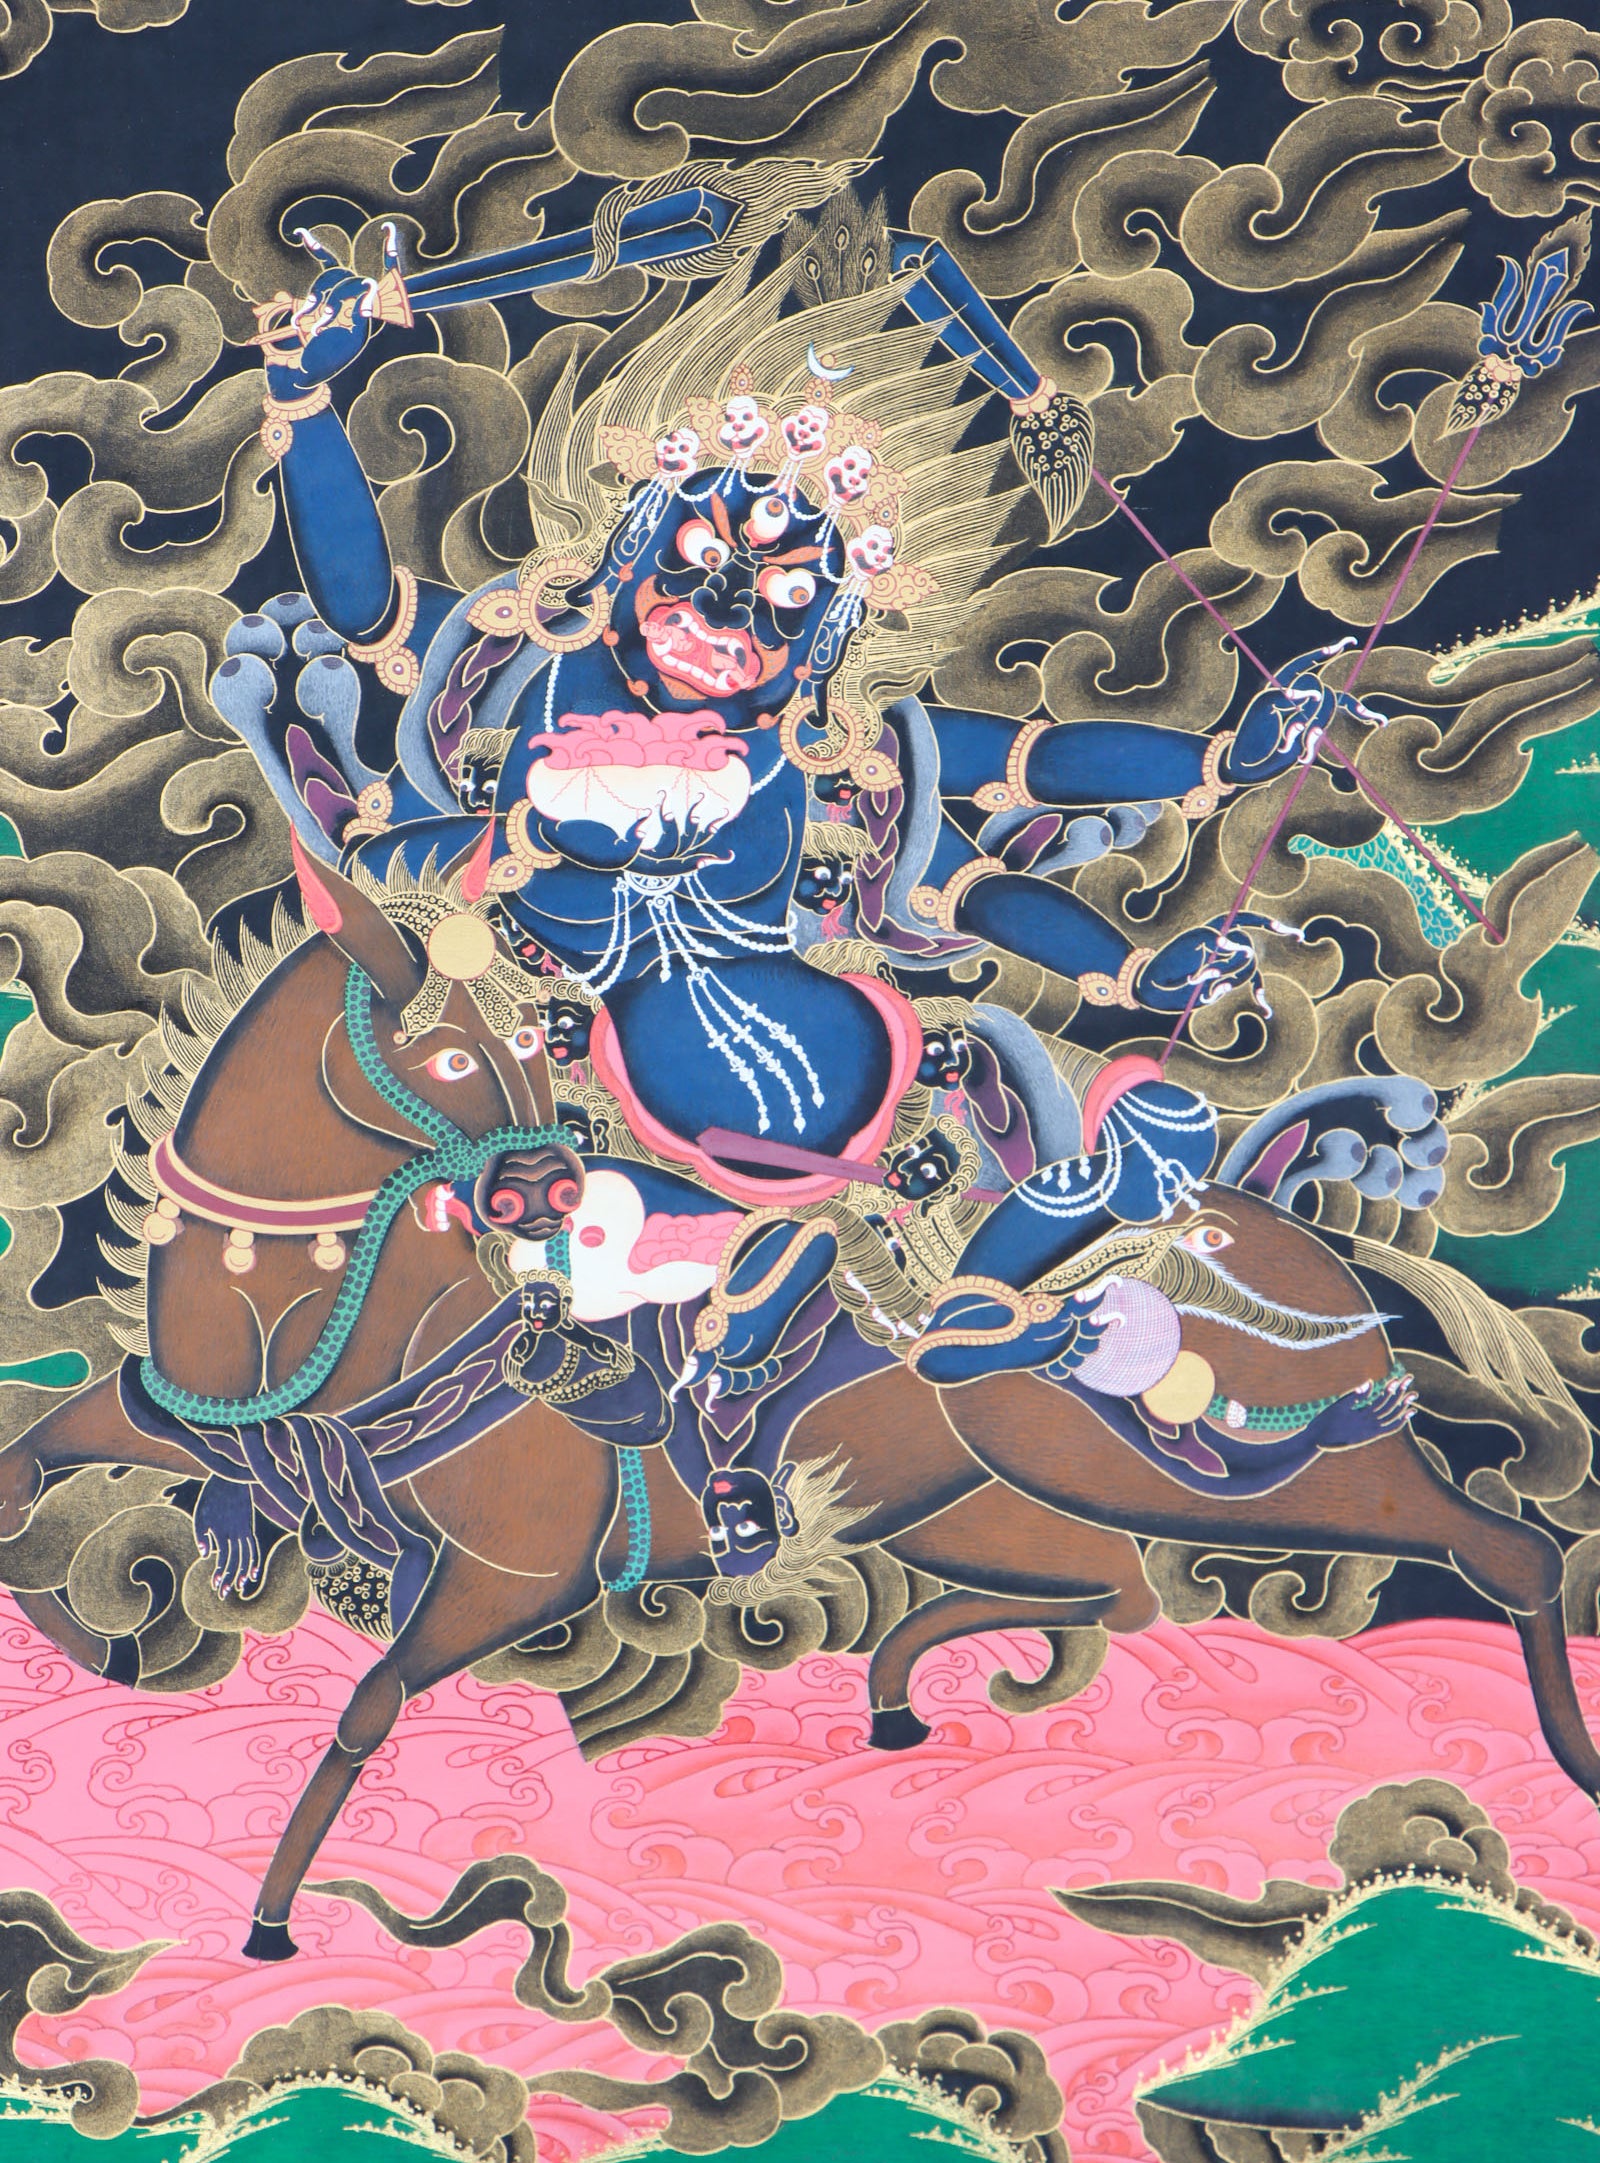 Palden Lhamo Thangka for guidance and protection.